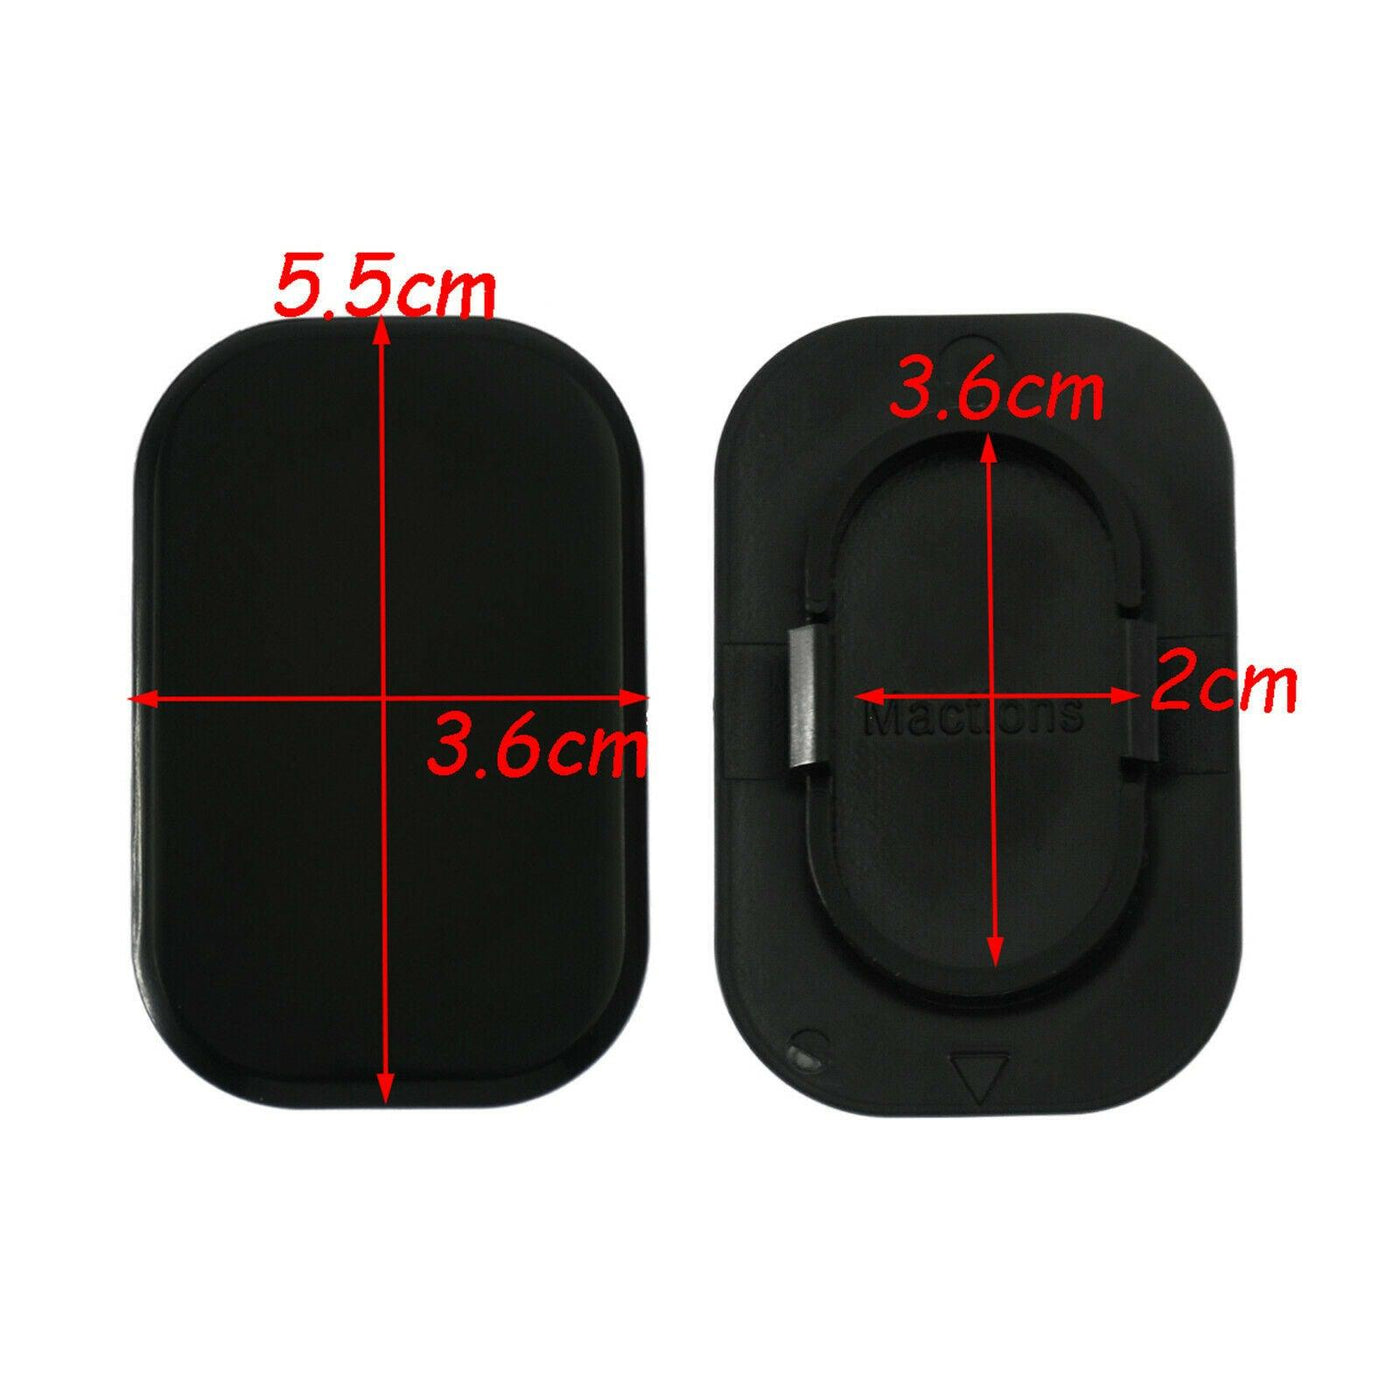 1 Pair Rear Black Antenna Hole Plug Filler Cover Fit For Harley Touring 2006-20 - Moto Life Products